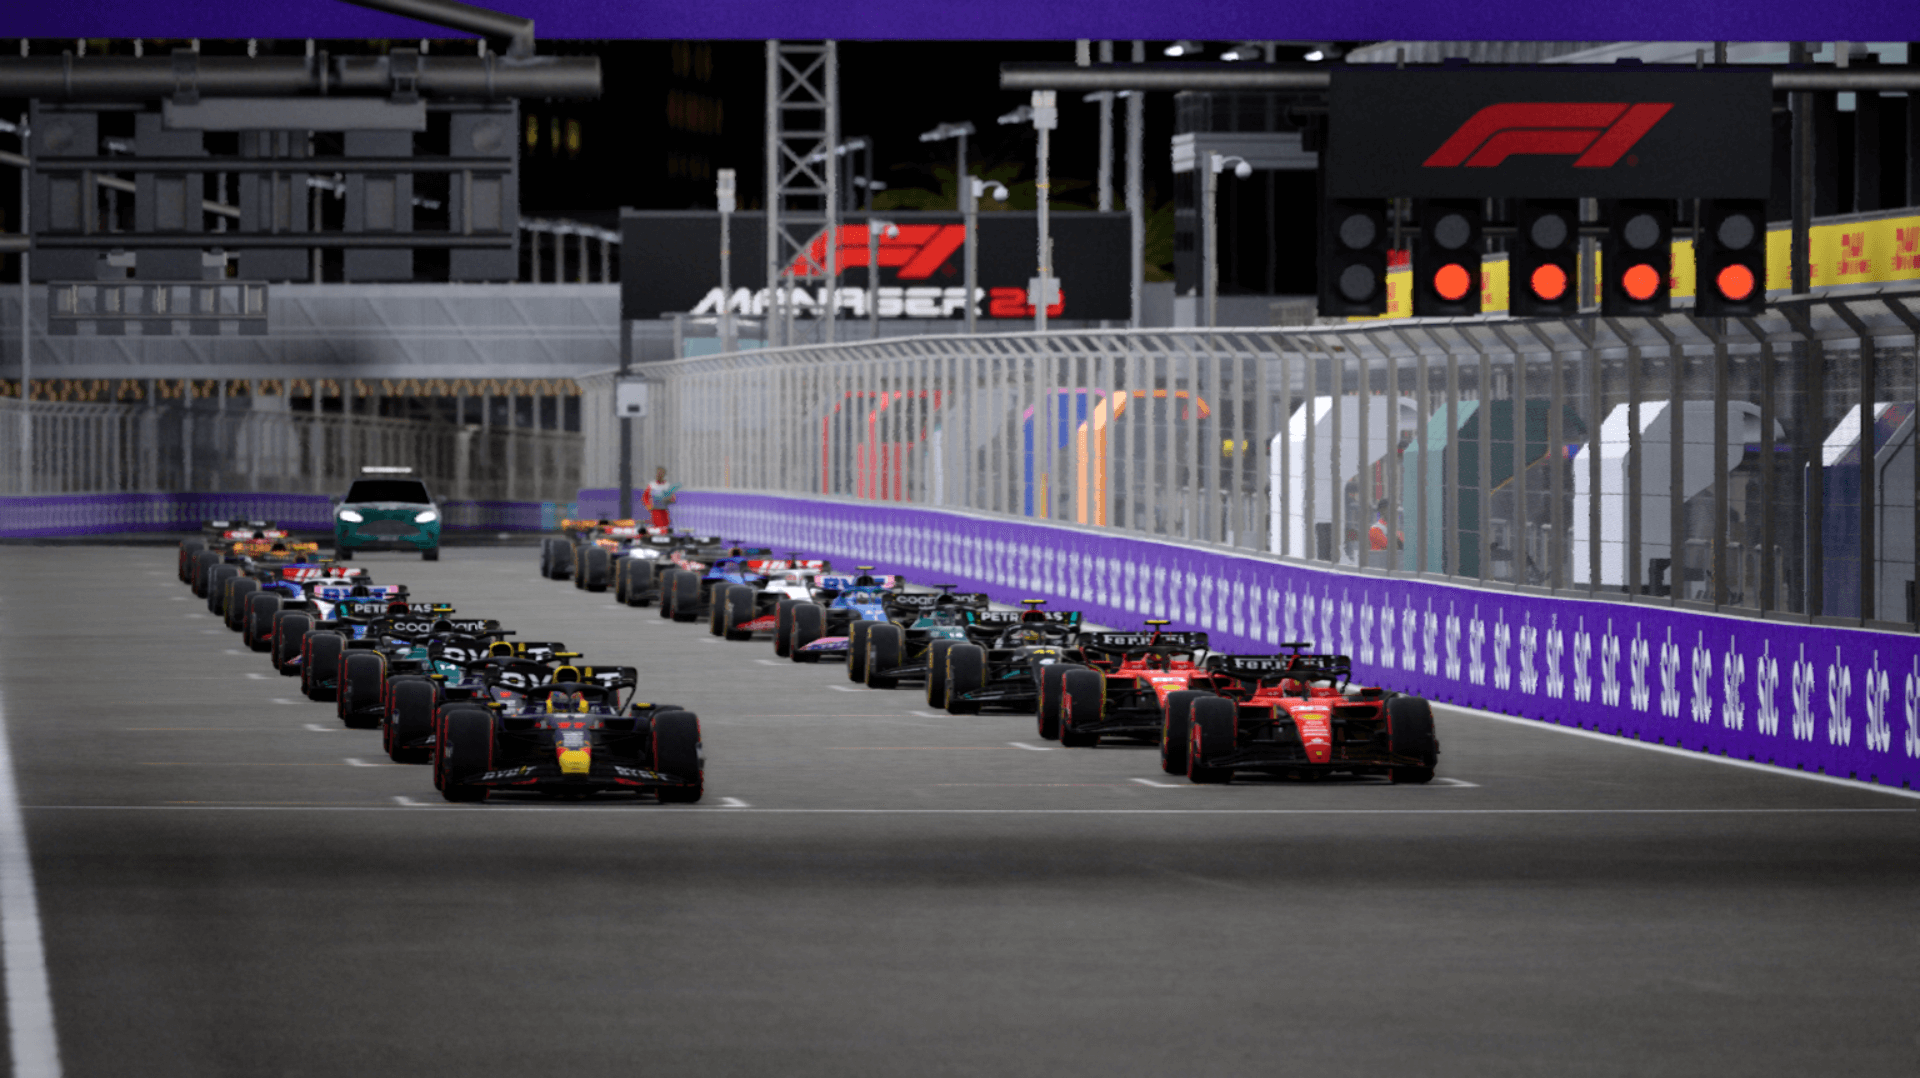 This photograph shows all the drivers ready for lights out positioned on the grid.